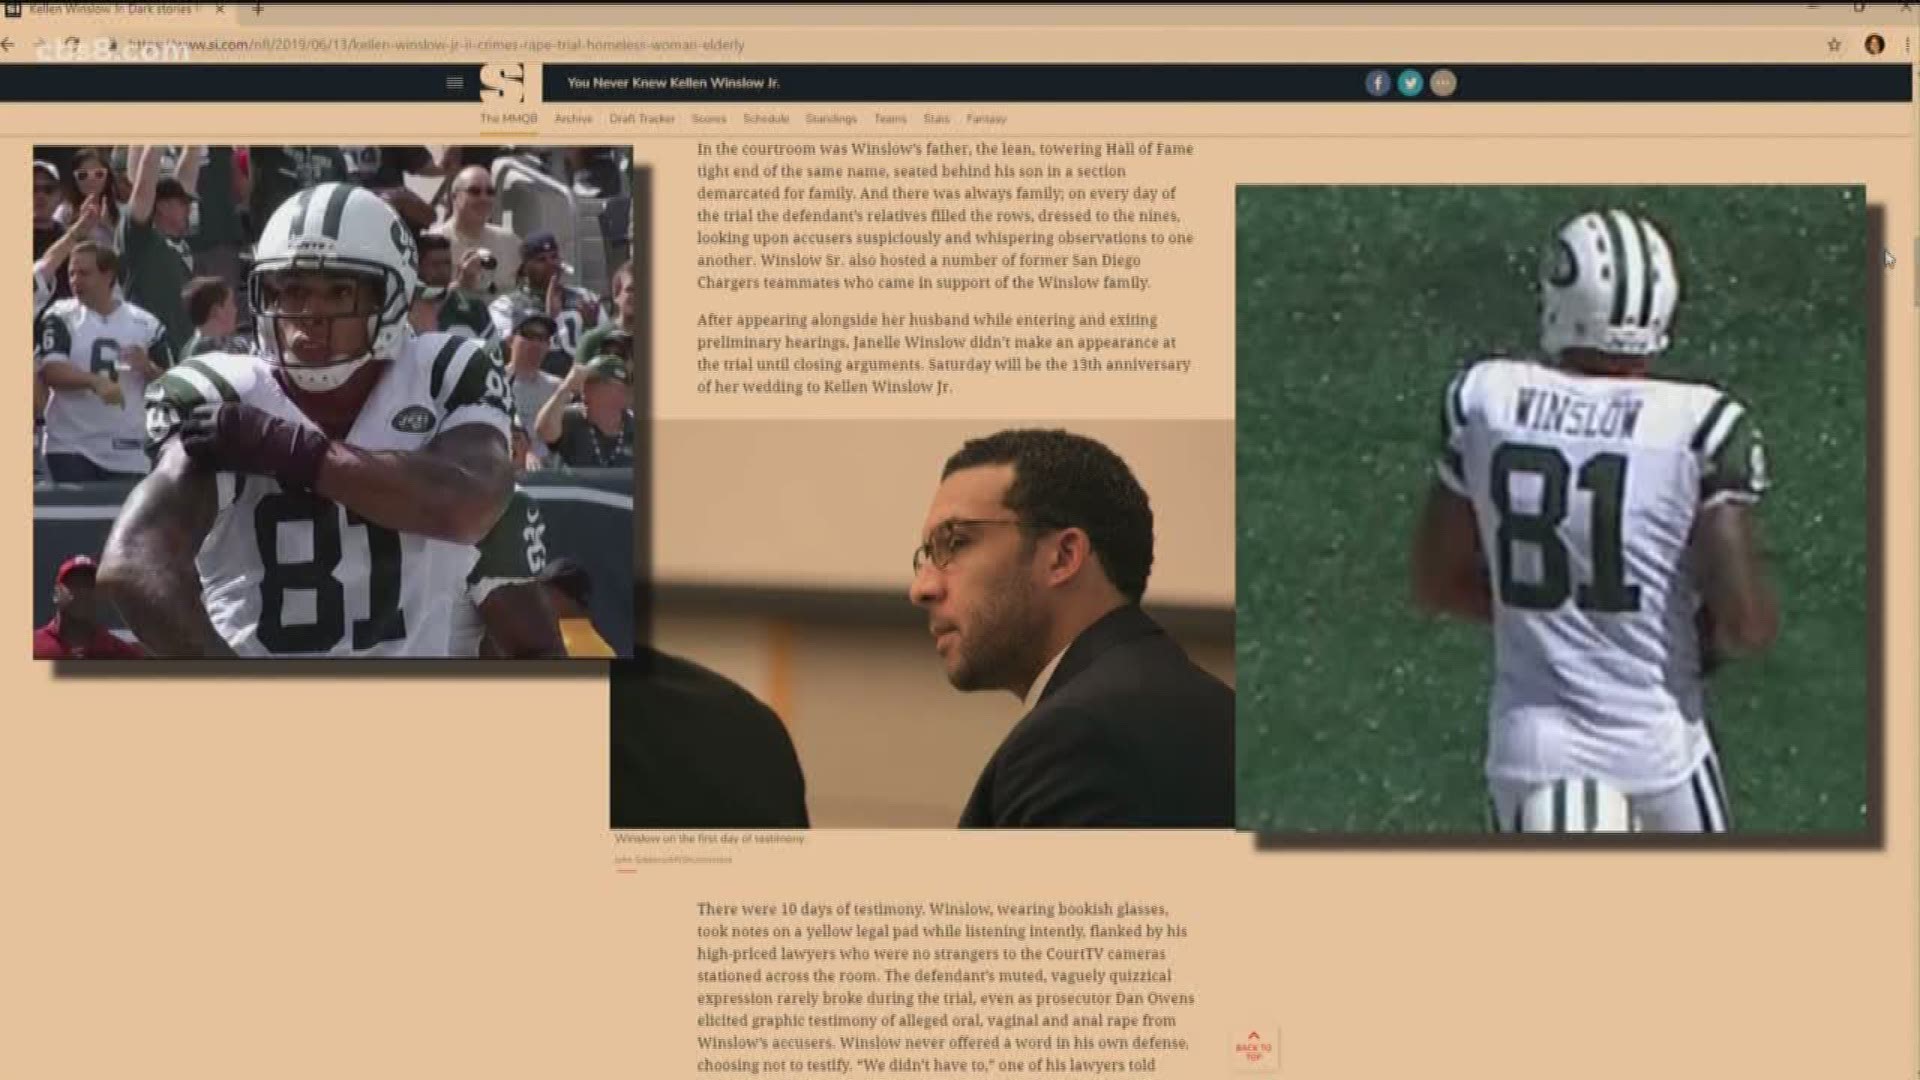 The Sports Illustrated report, published after Kellen Winslow II's conviction on felony rape, offers an unsettling look at Winslow's reported behavior